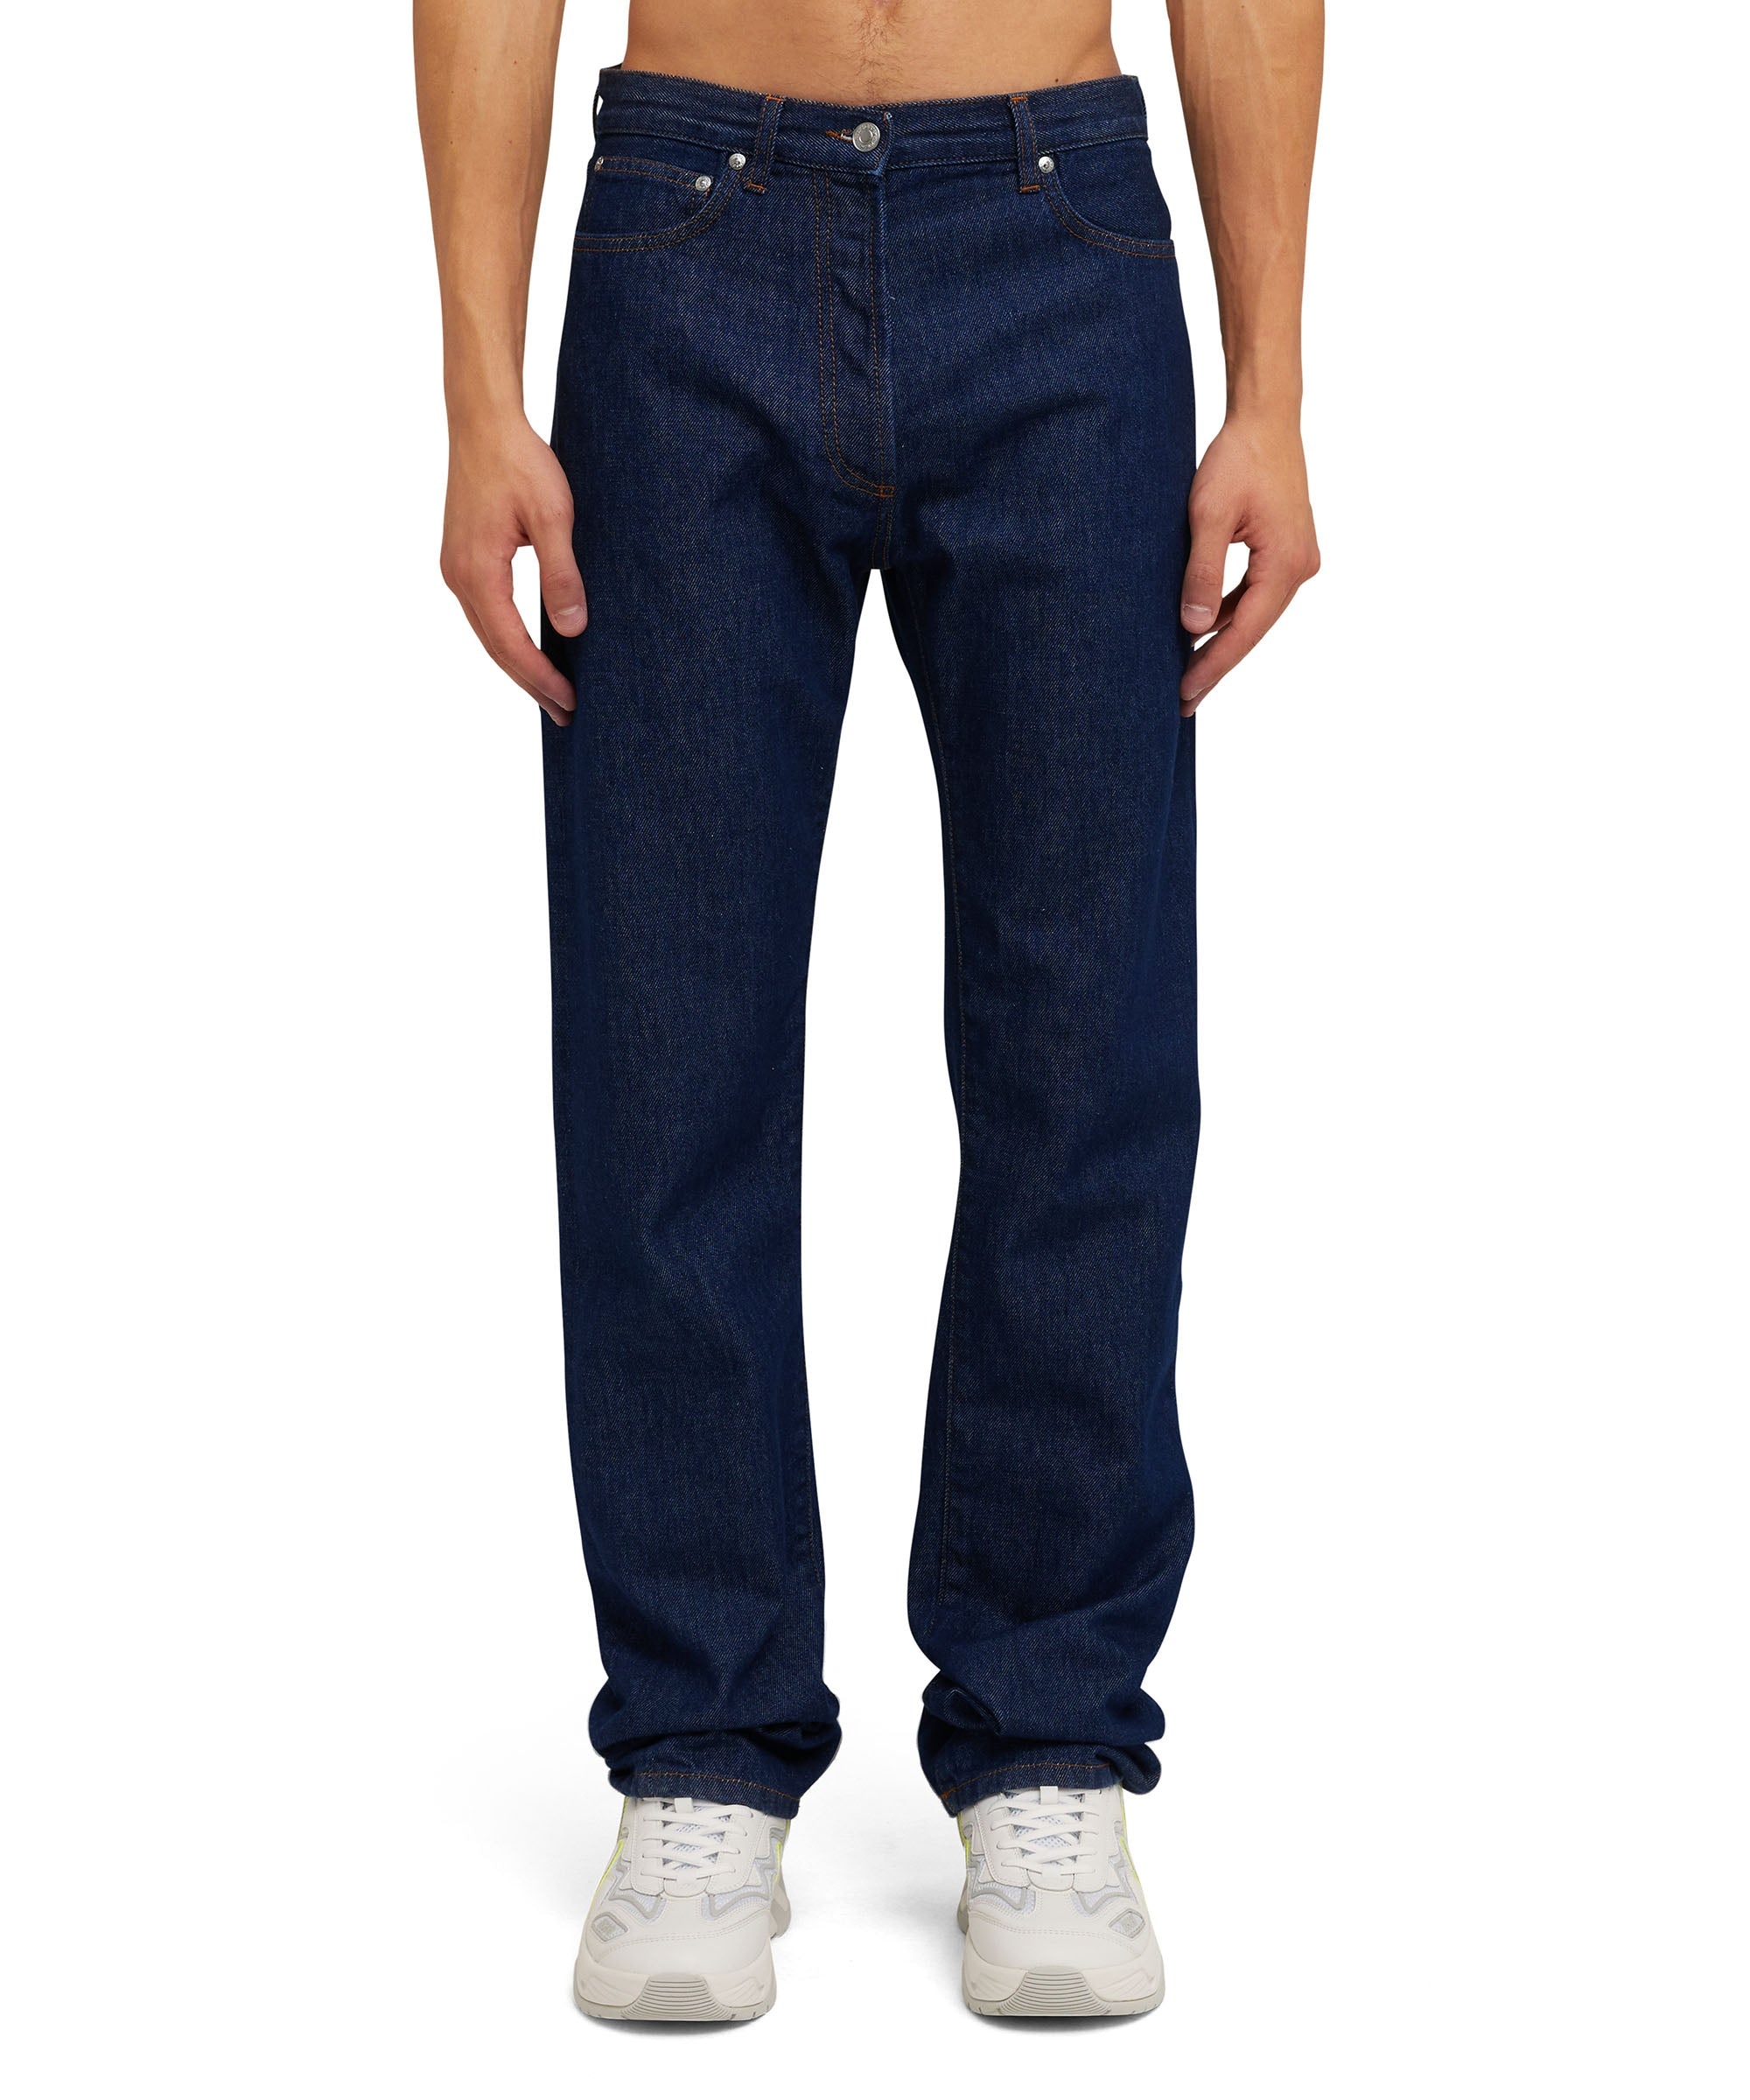 Solid color tailored jeans with straight legs - 1